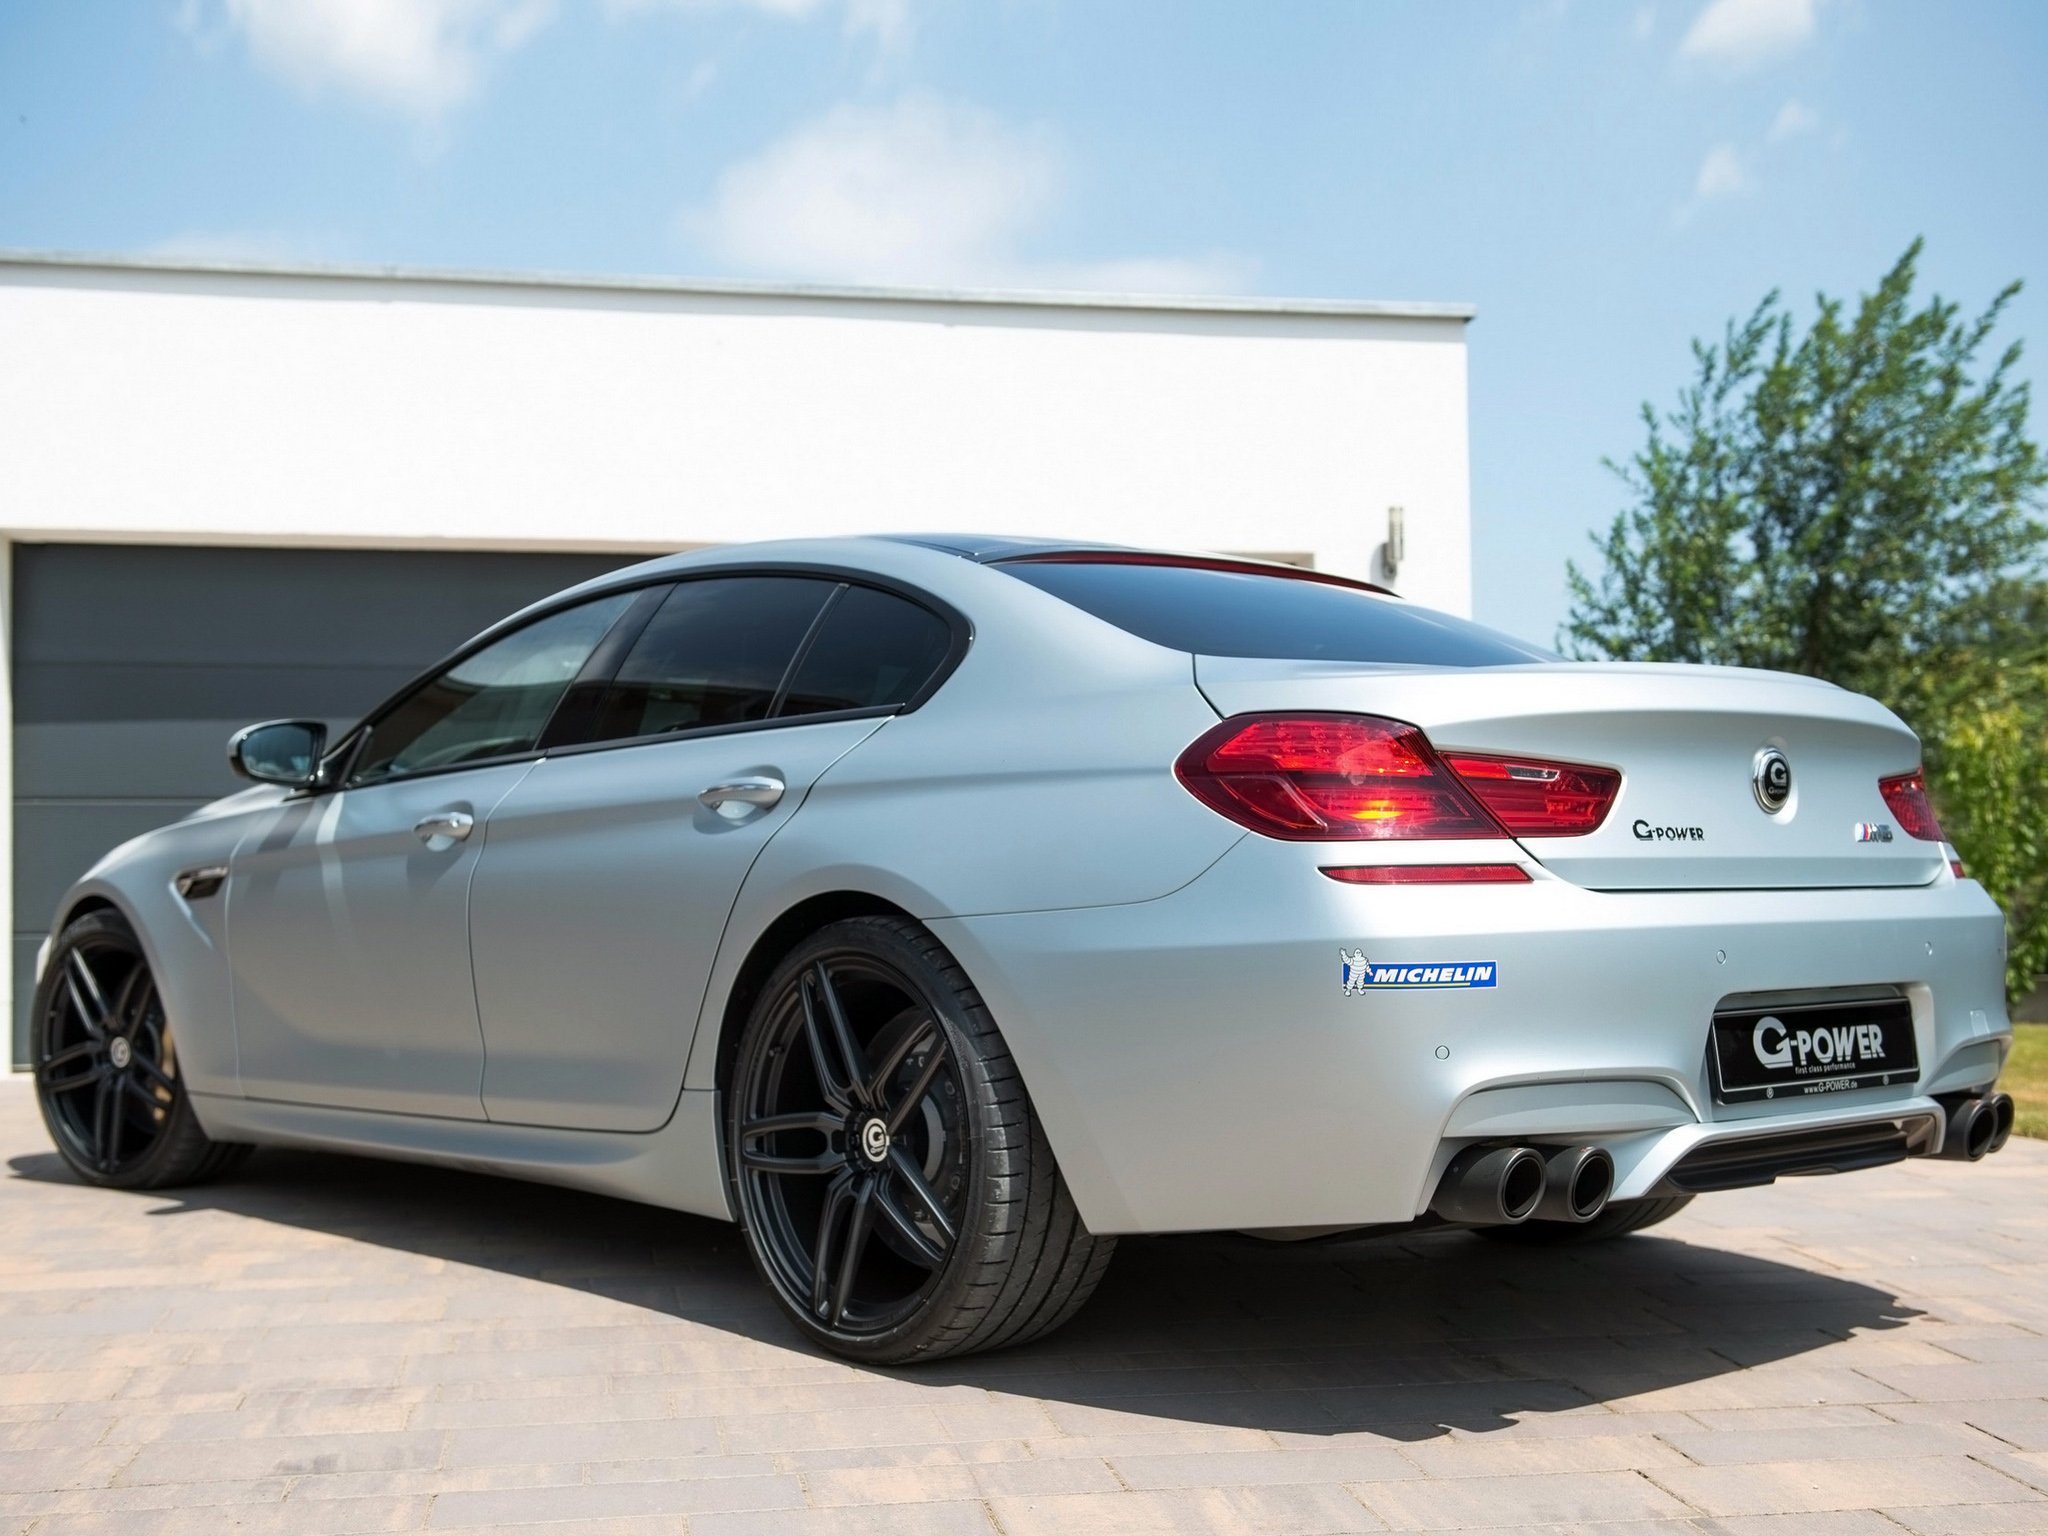 2014, G power, Bmw, M 6, Gran, Coupe, F06, Tuning Wallpaper